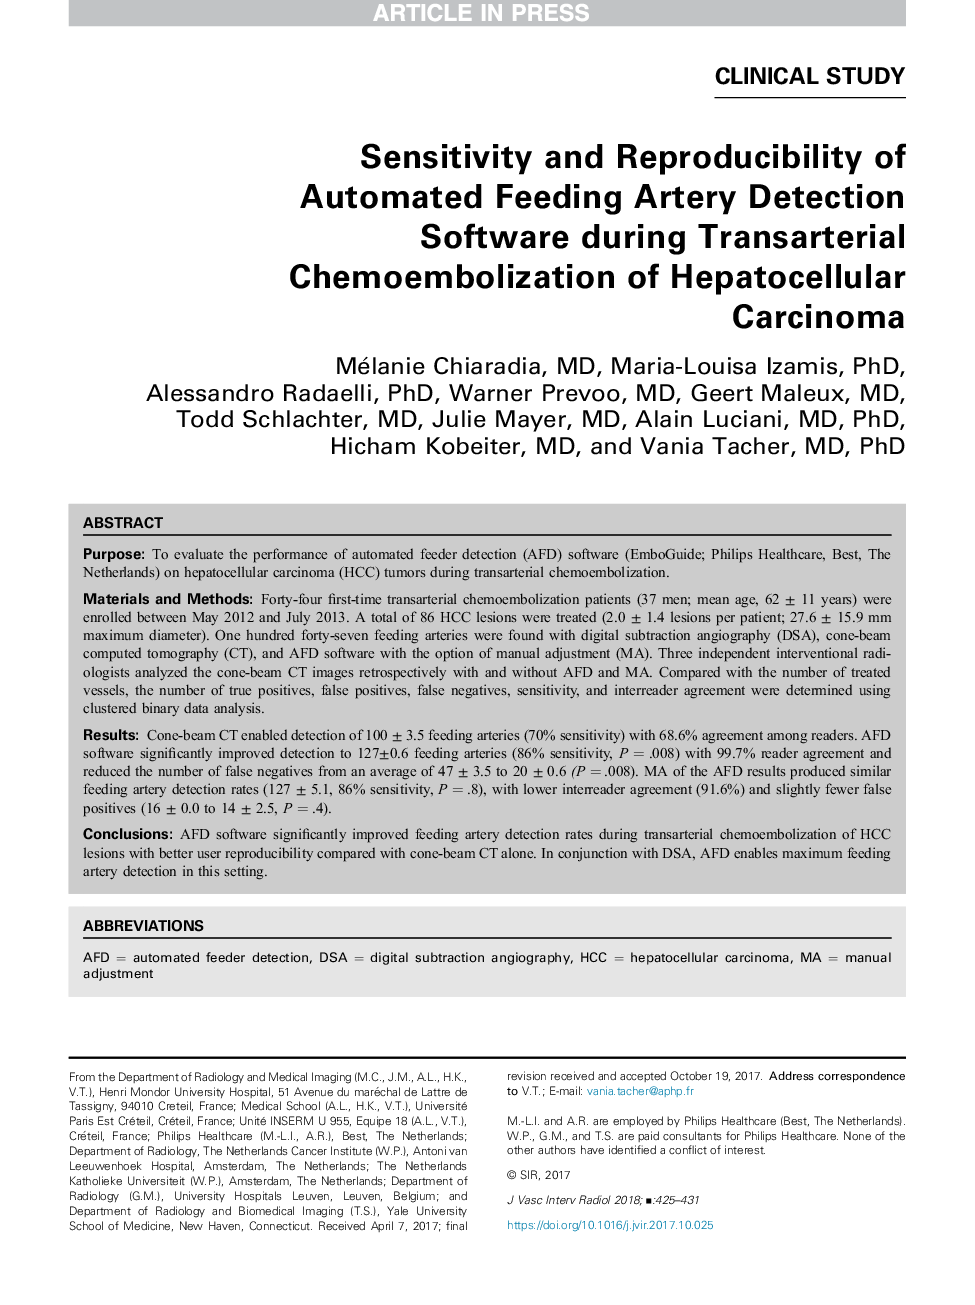 Sensitivity and Reproducibility of Automated Feeding Artery Detection Software during Transarterial Chemoembolization of Hepatocellular Carcinoma